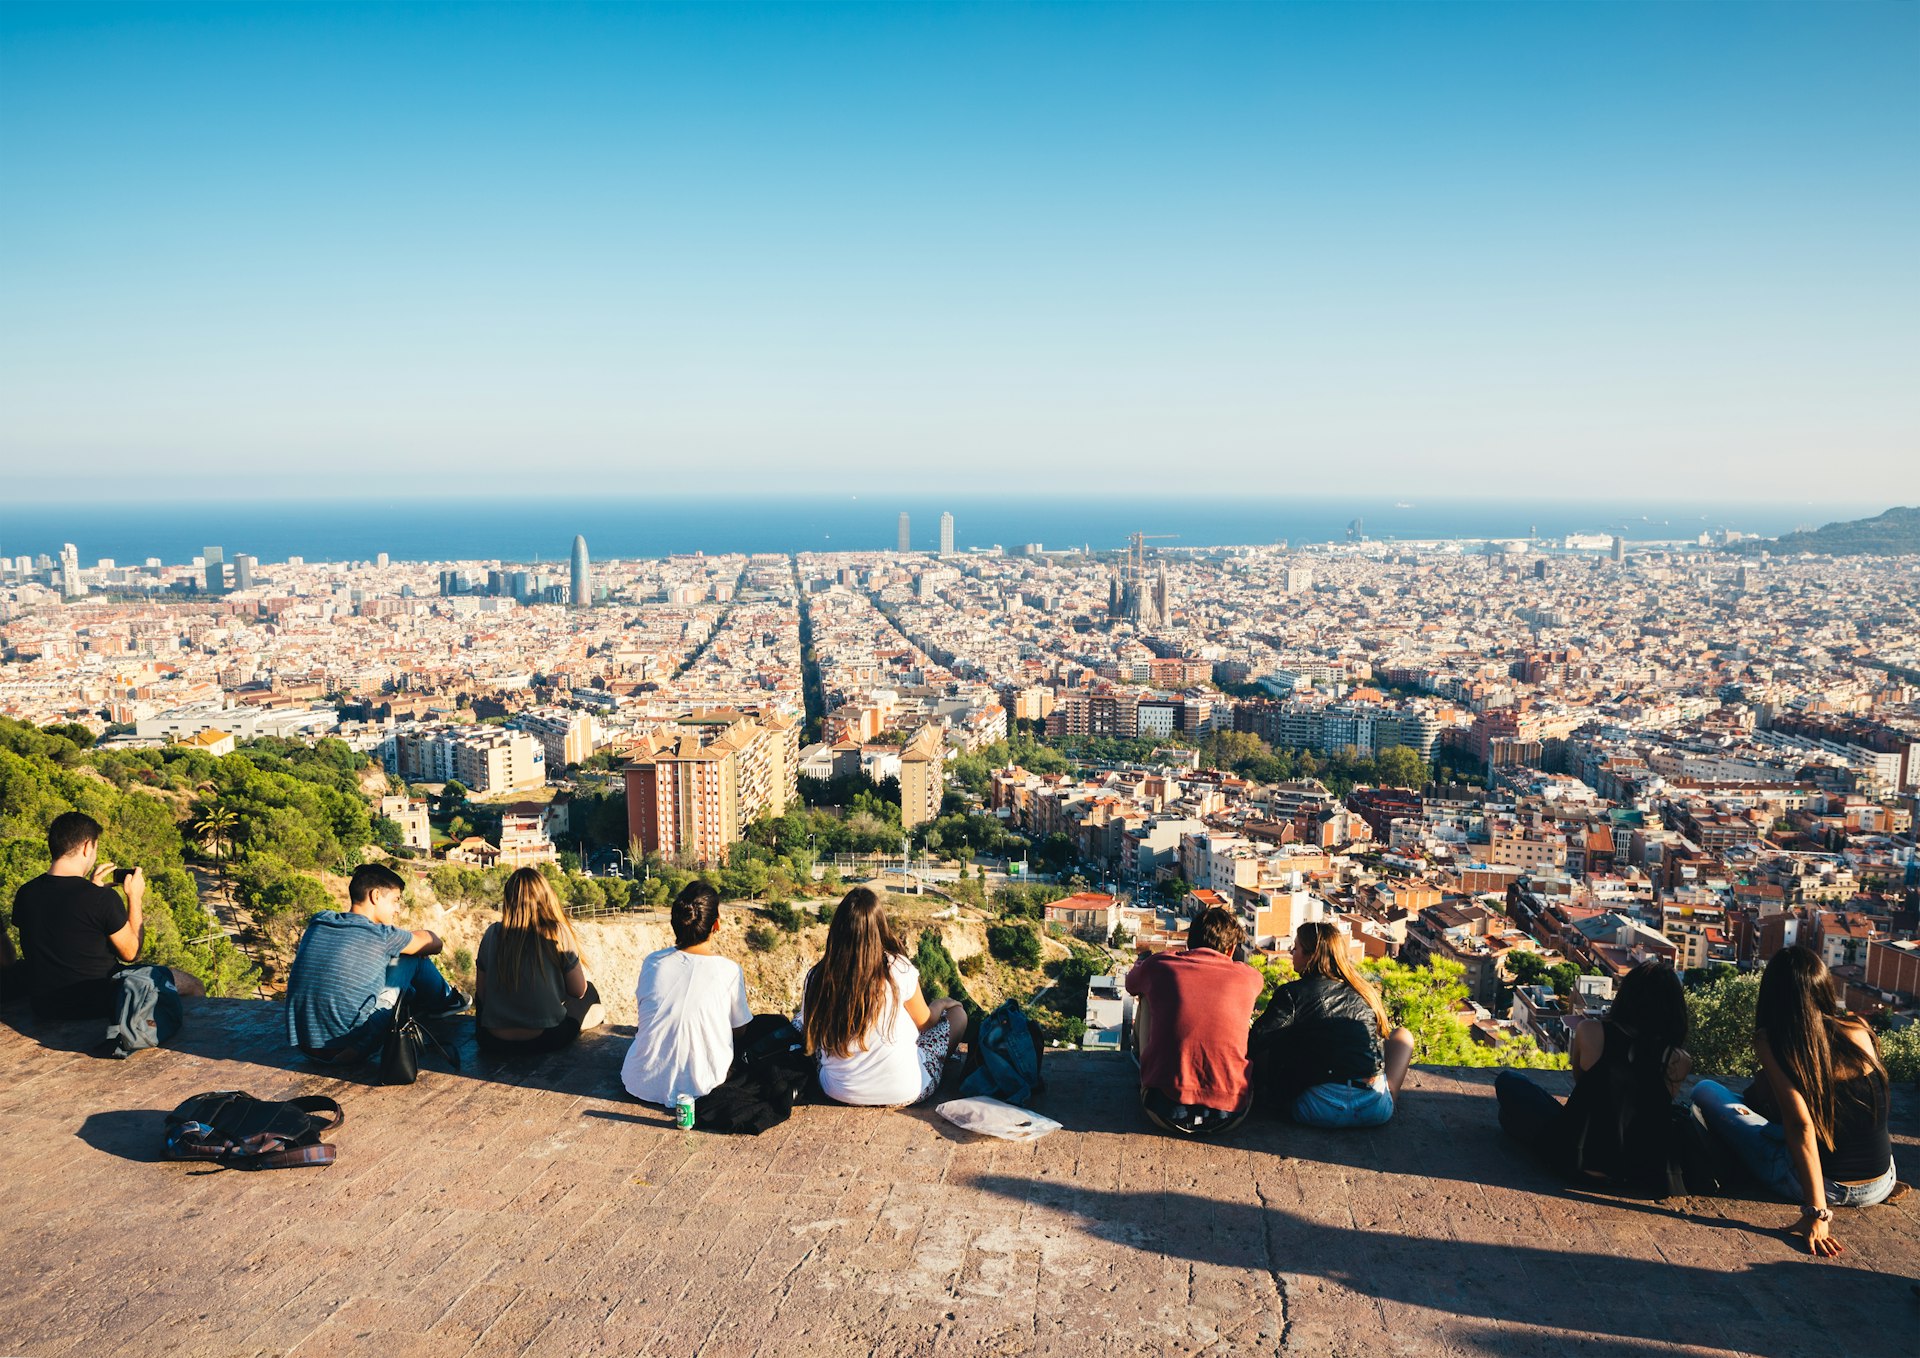 View of people sitting on a hill in Park Guell Barcelona